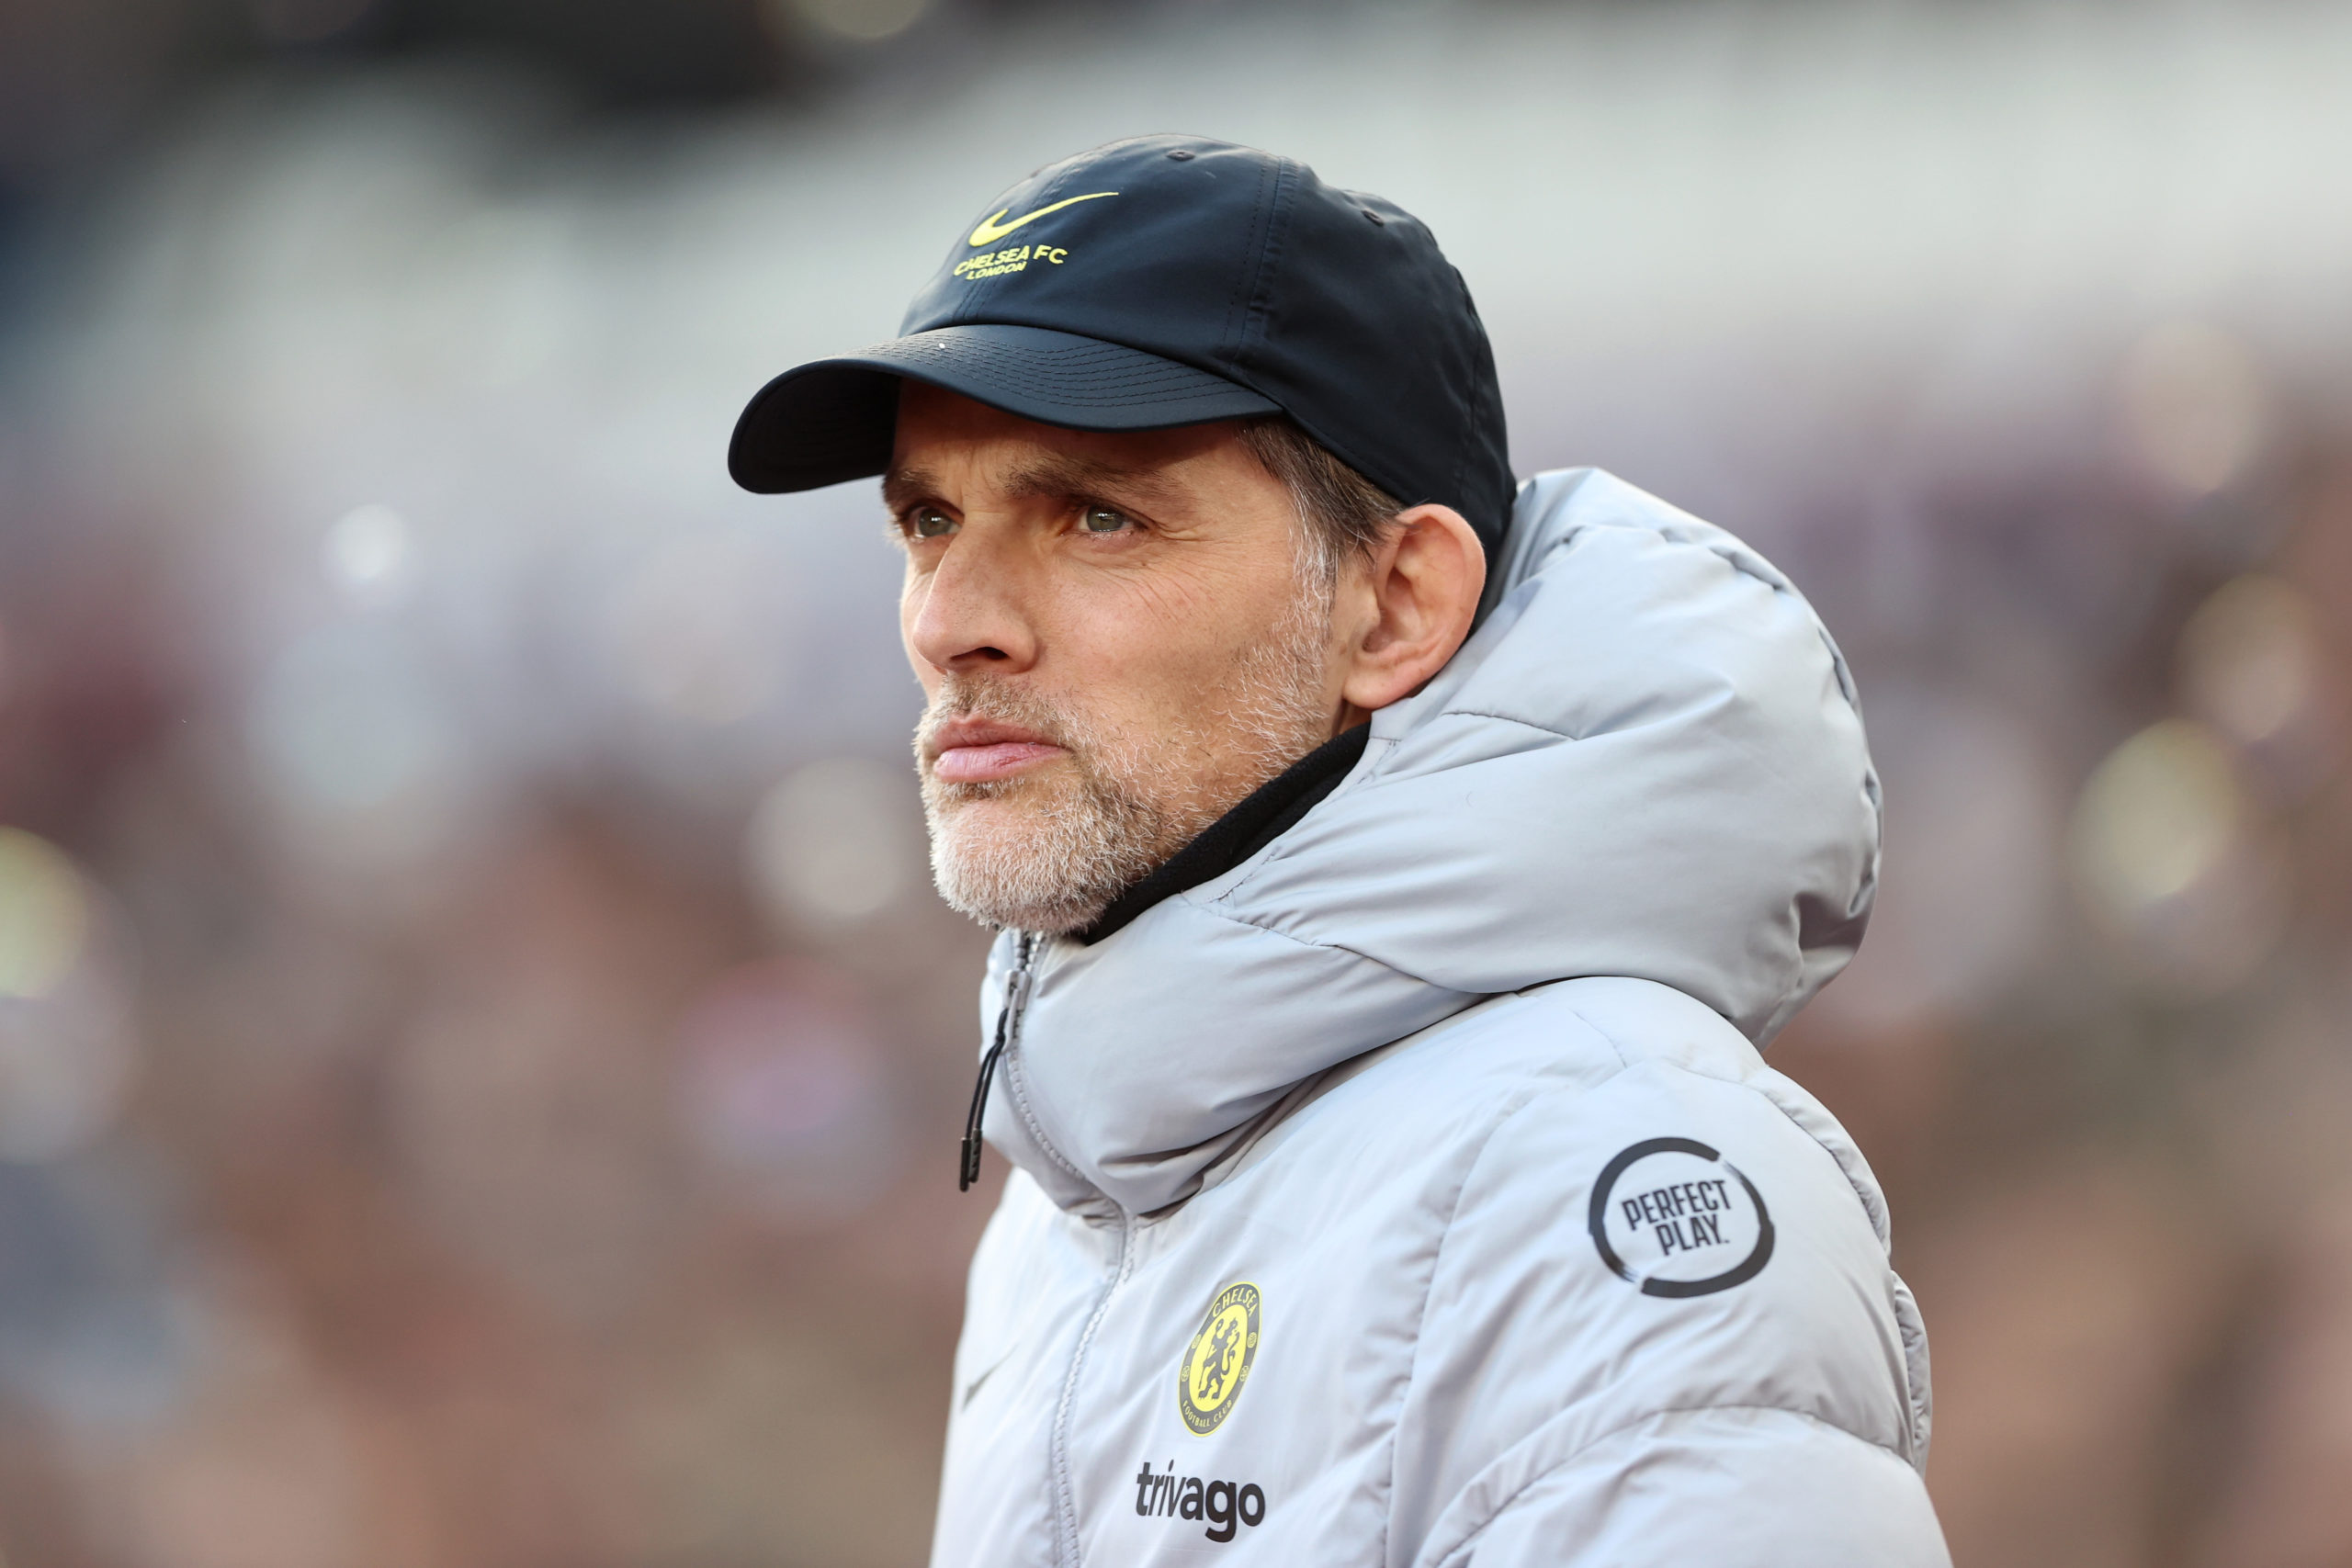 'Would cook under Tuchel': Some Chelsea fans want to sign £50m star who 'bullied' Arsenal last night